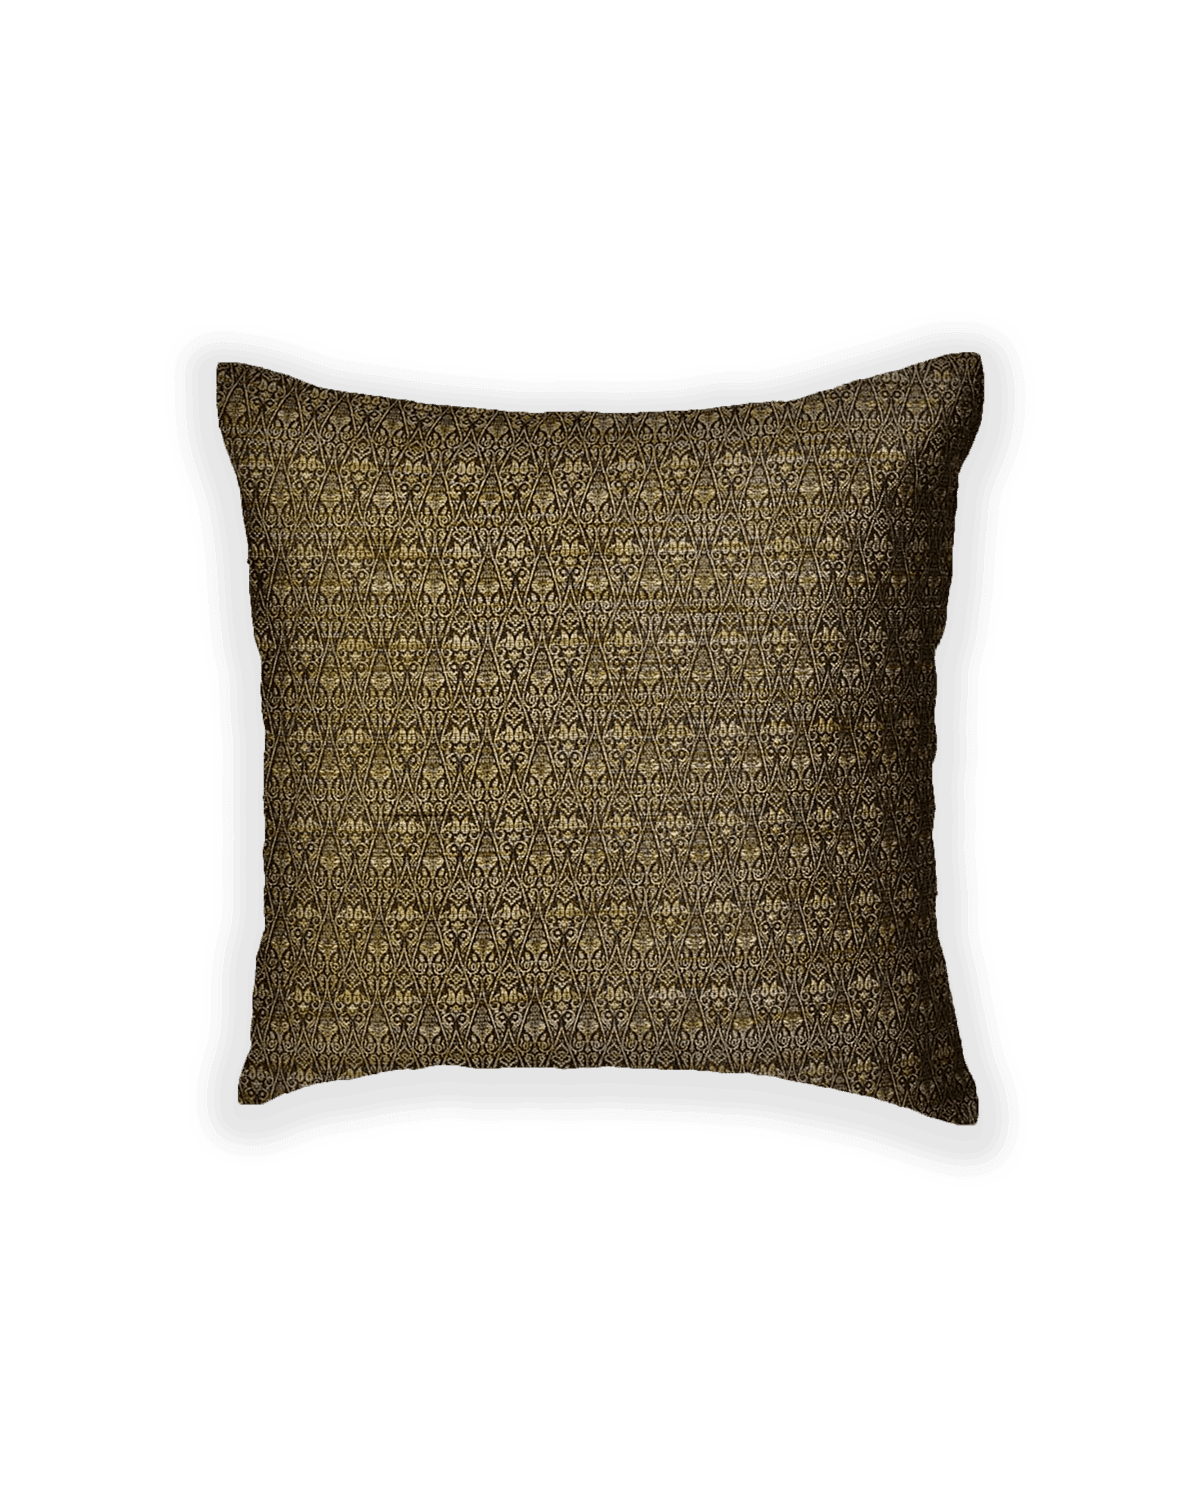 Metallic Black Brocade Woven Poly Cotton Cushion Cover with Satin Back 16" - By HolyWeaves, Benares